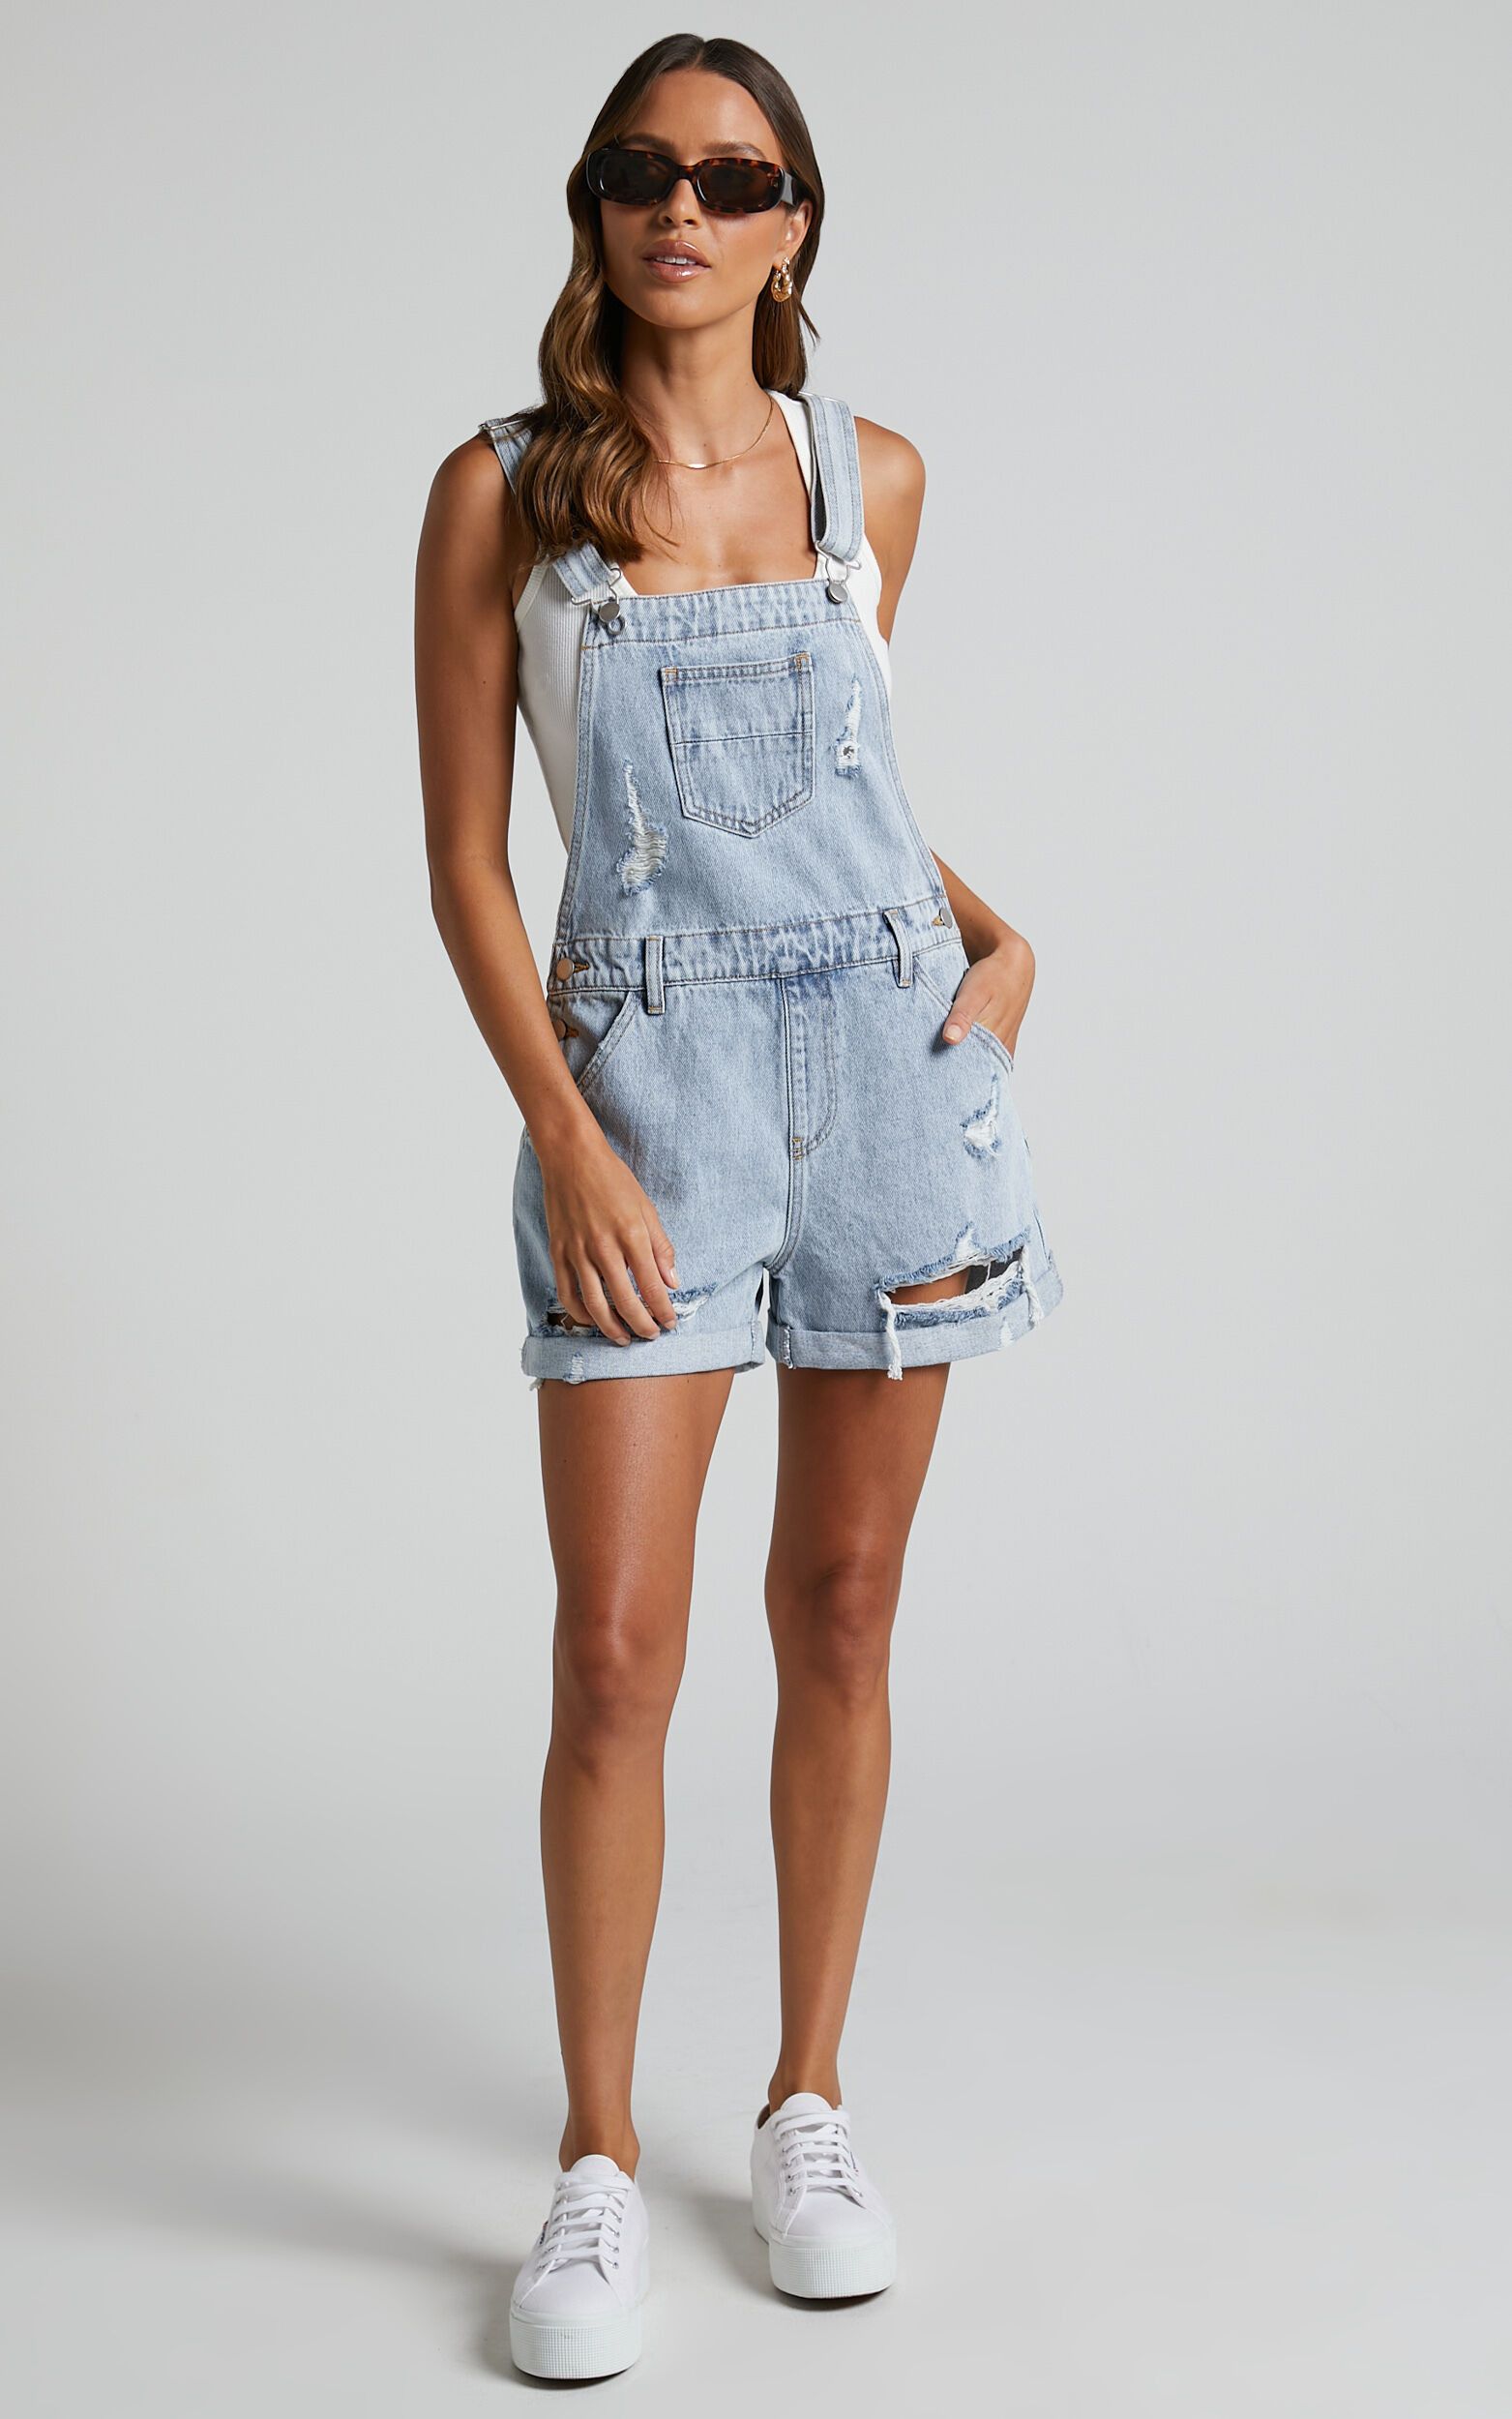 Rheana Overalls - Recycled Cotton Denim Short Overalls in Mid Blue Wash | Showpo (US, UK & Europe)